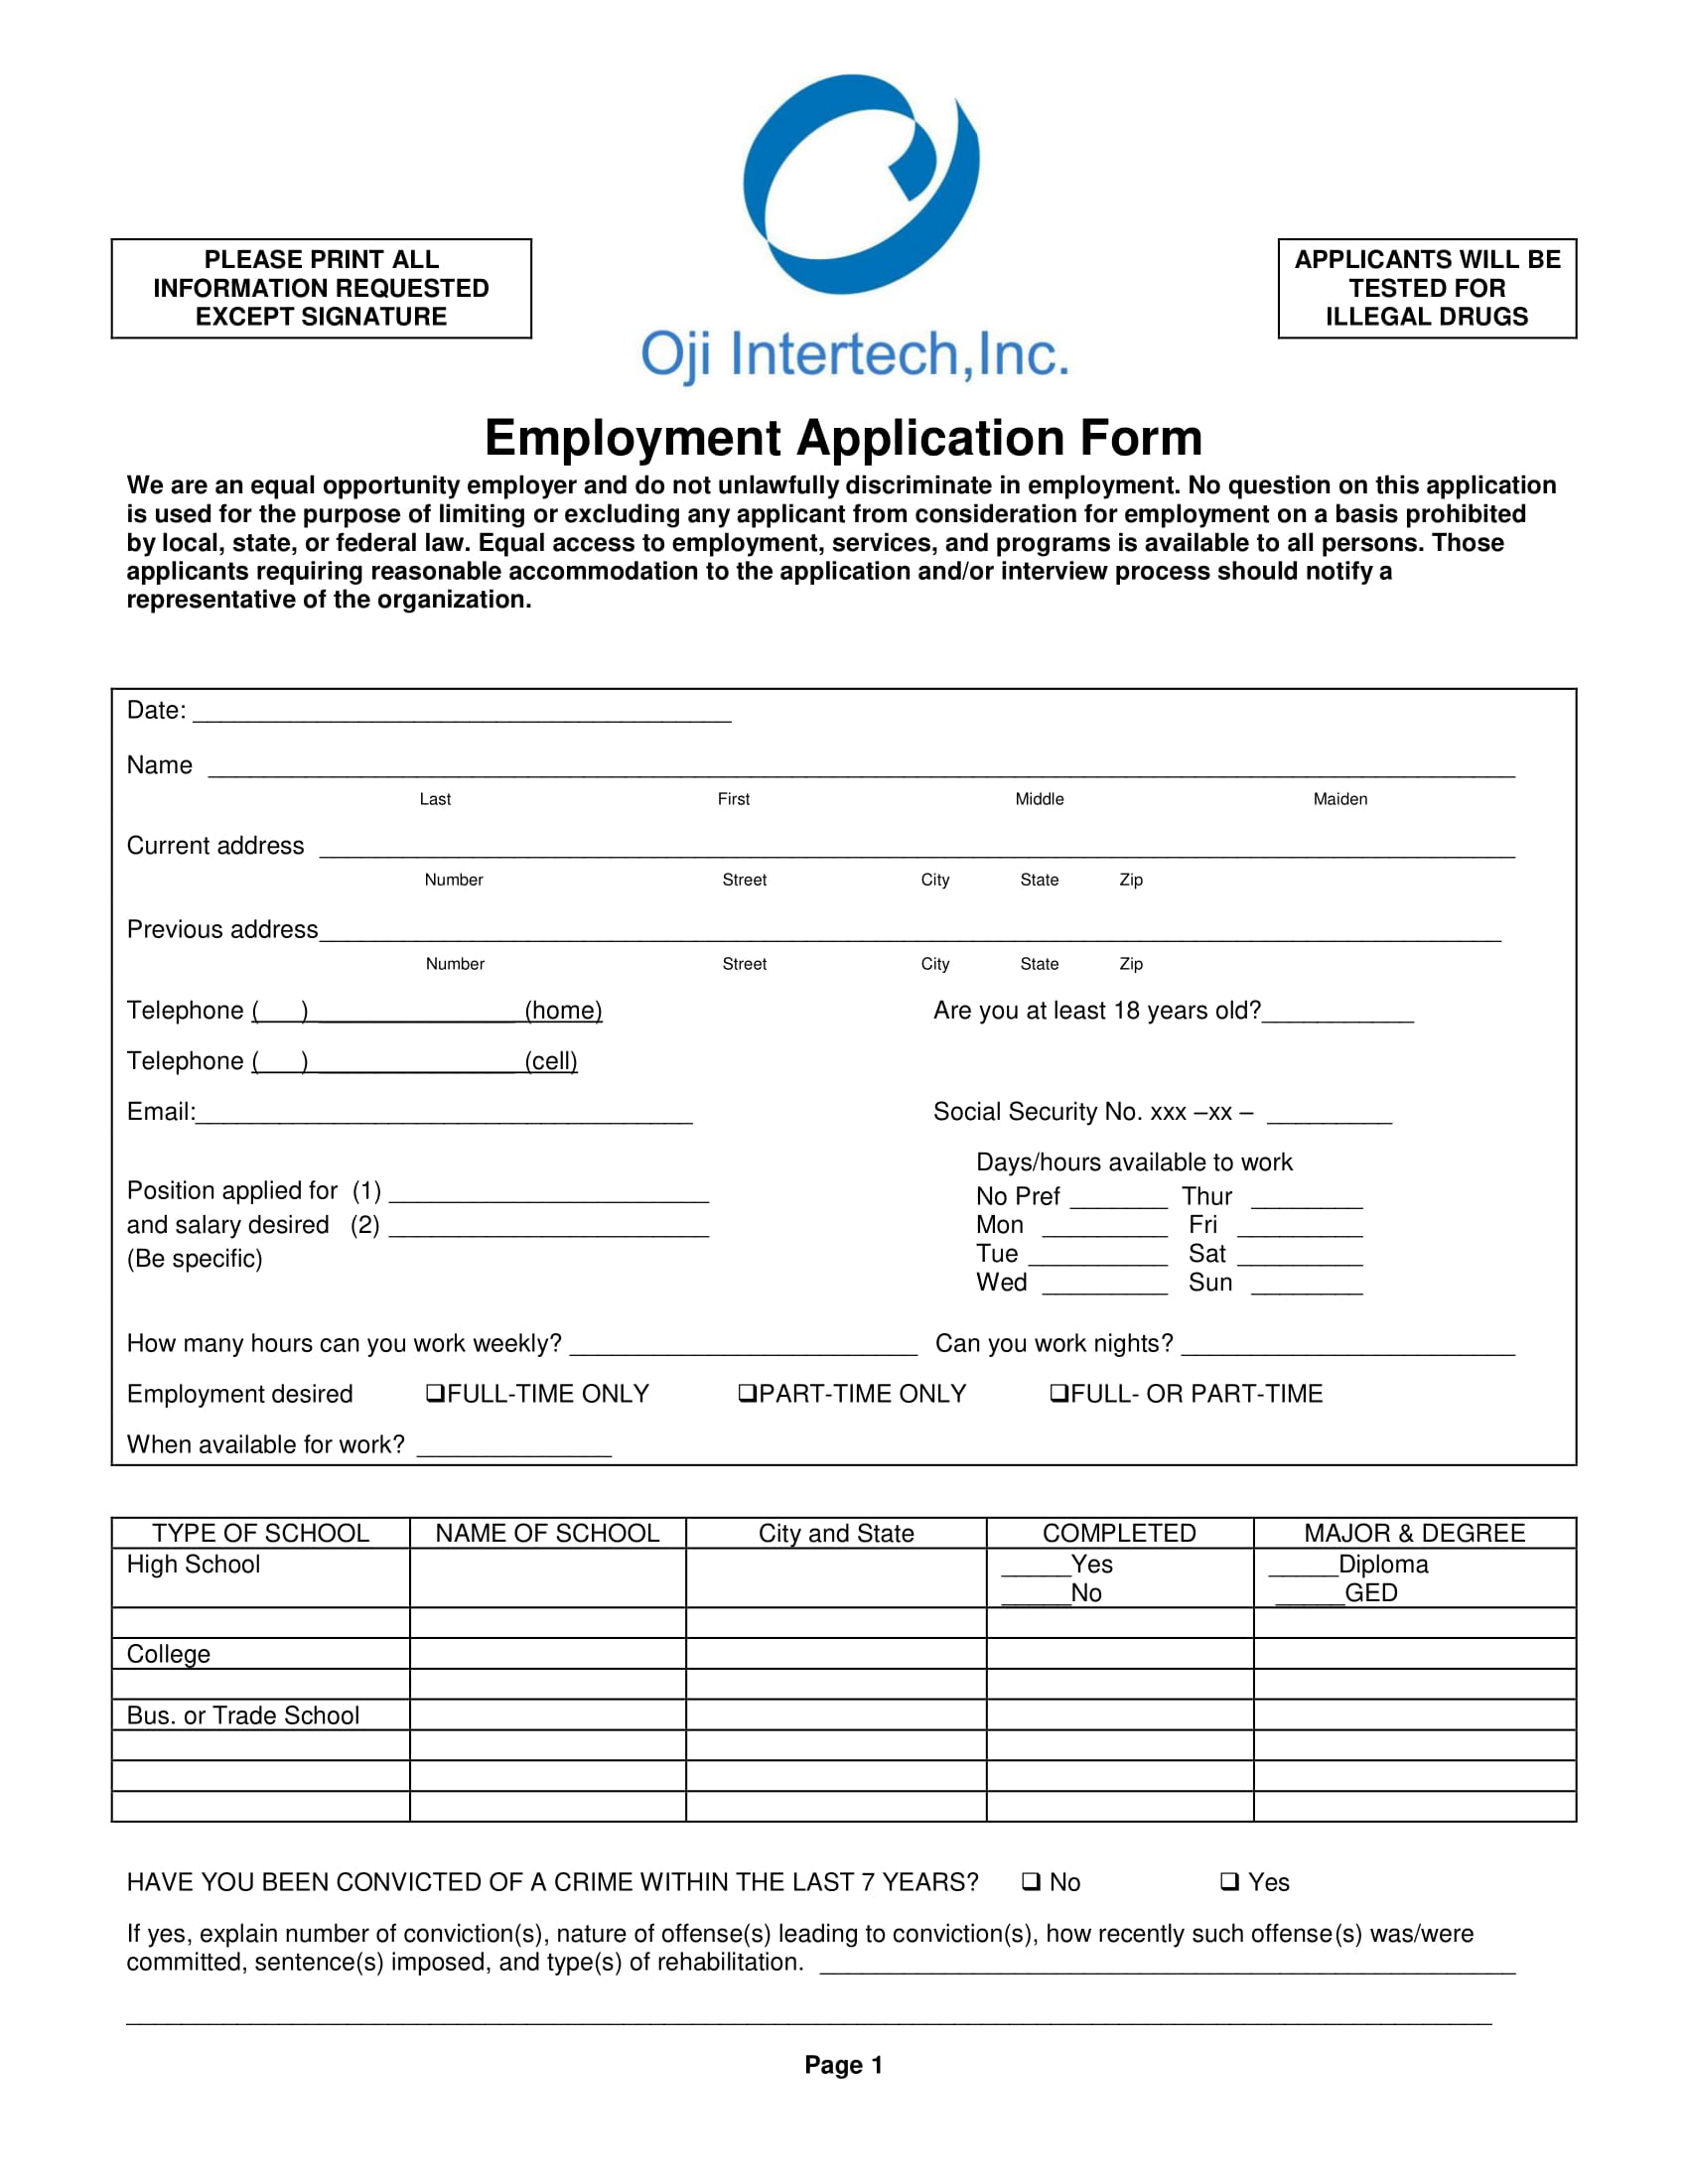 Employment Application Form Example